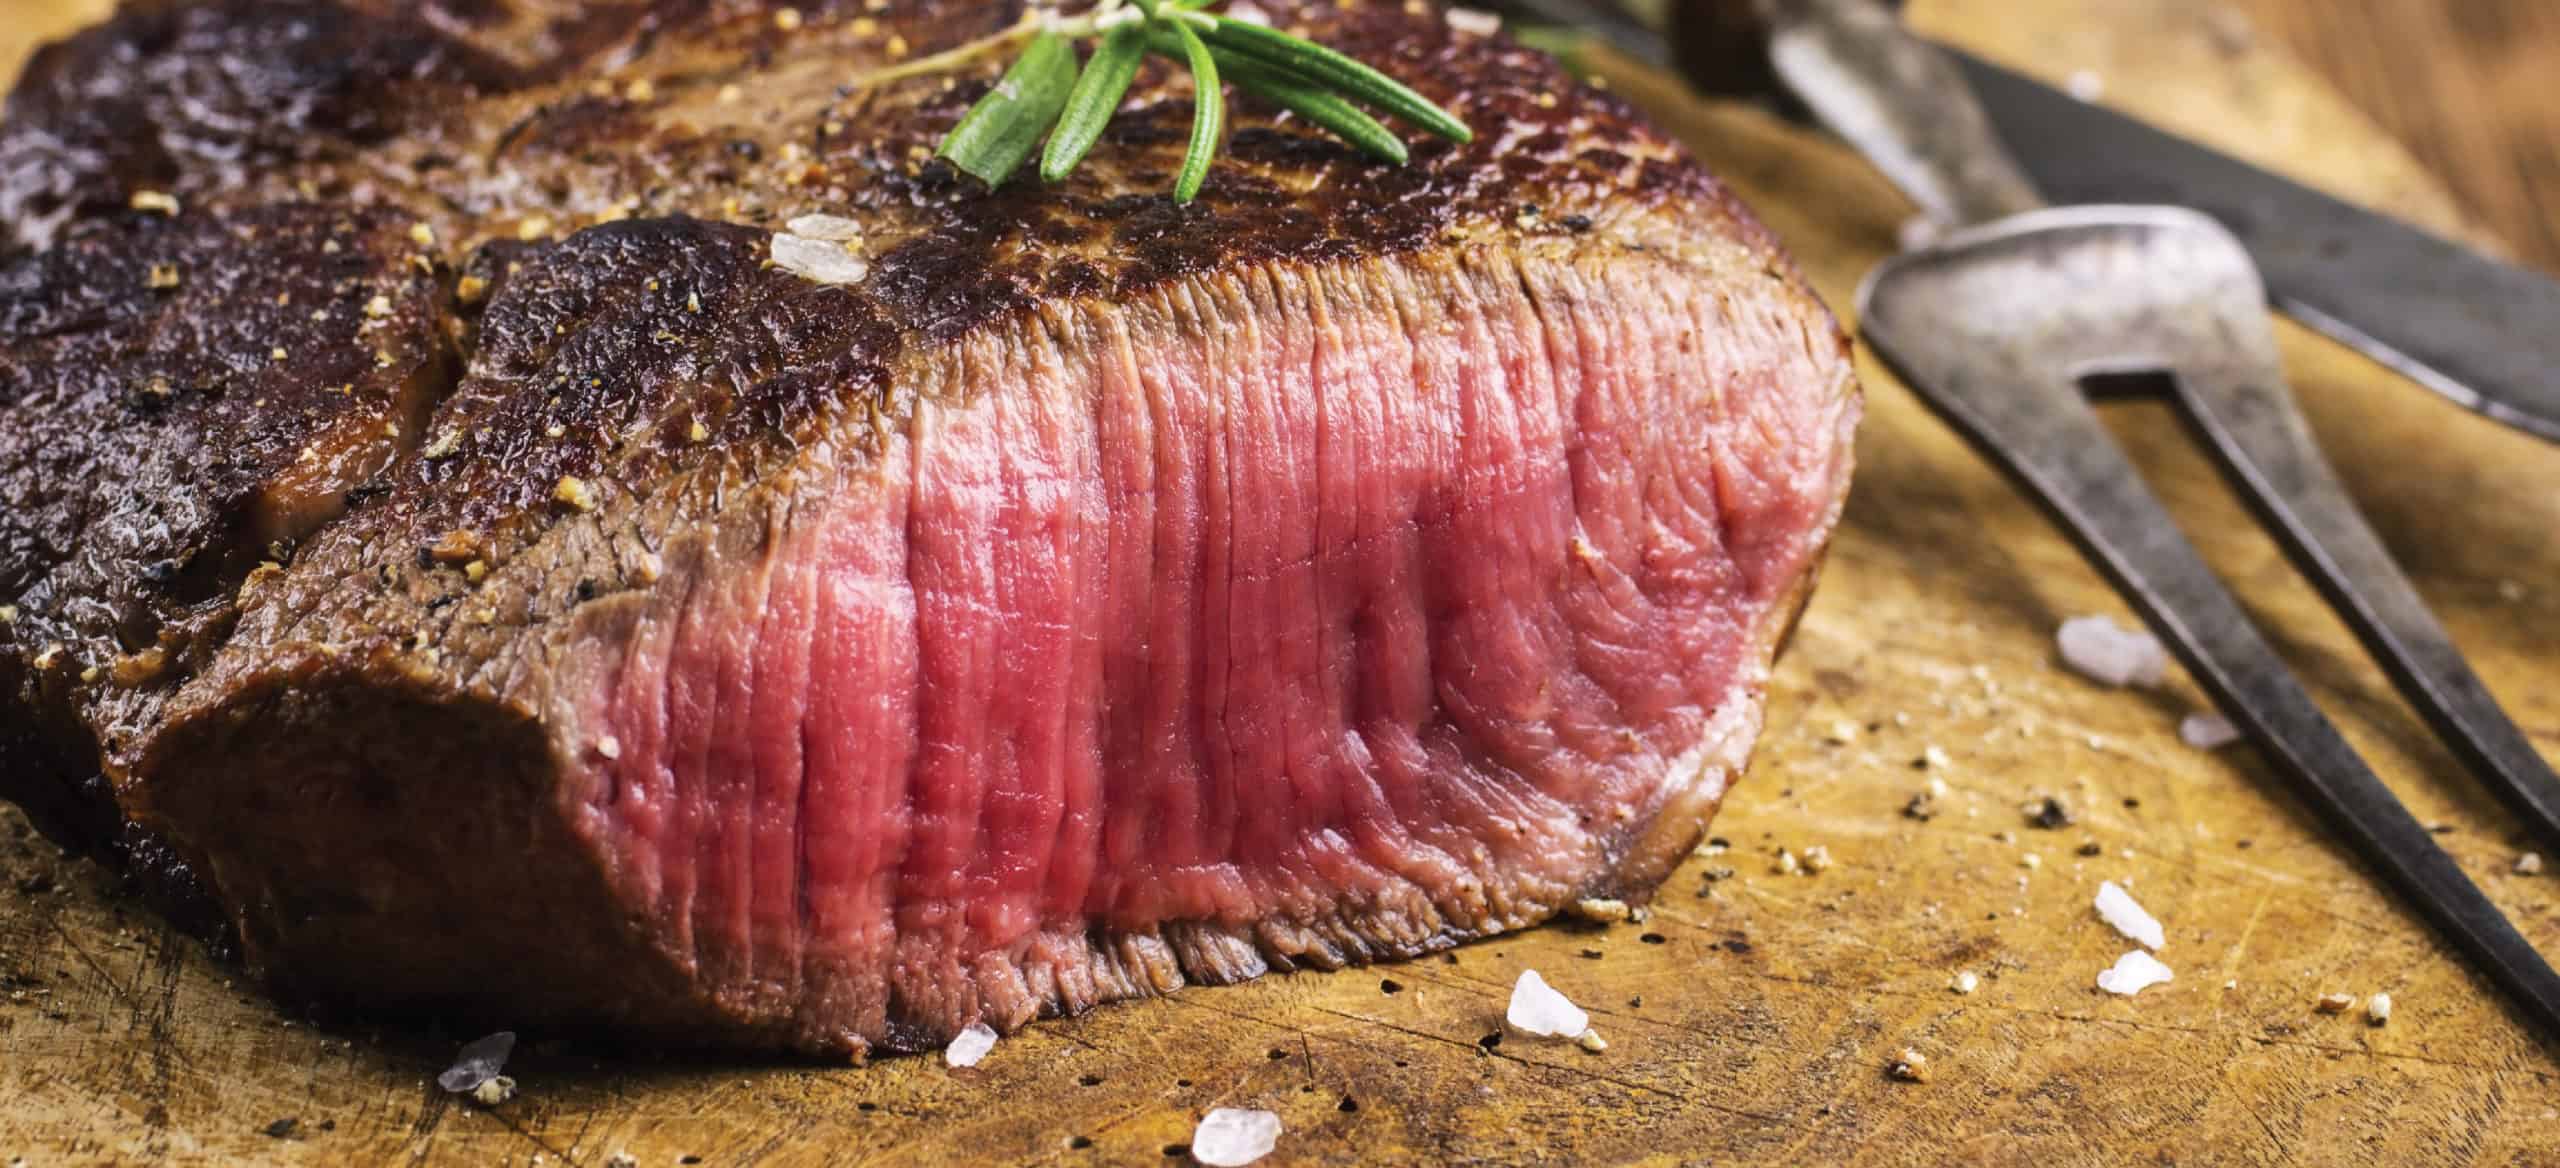 Is red meat bad for you? - Dr. Axe